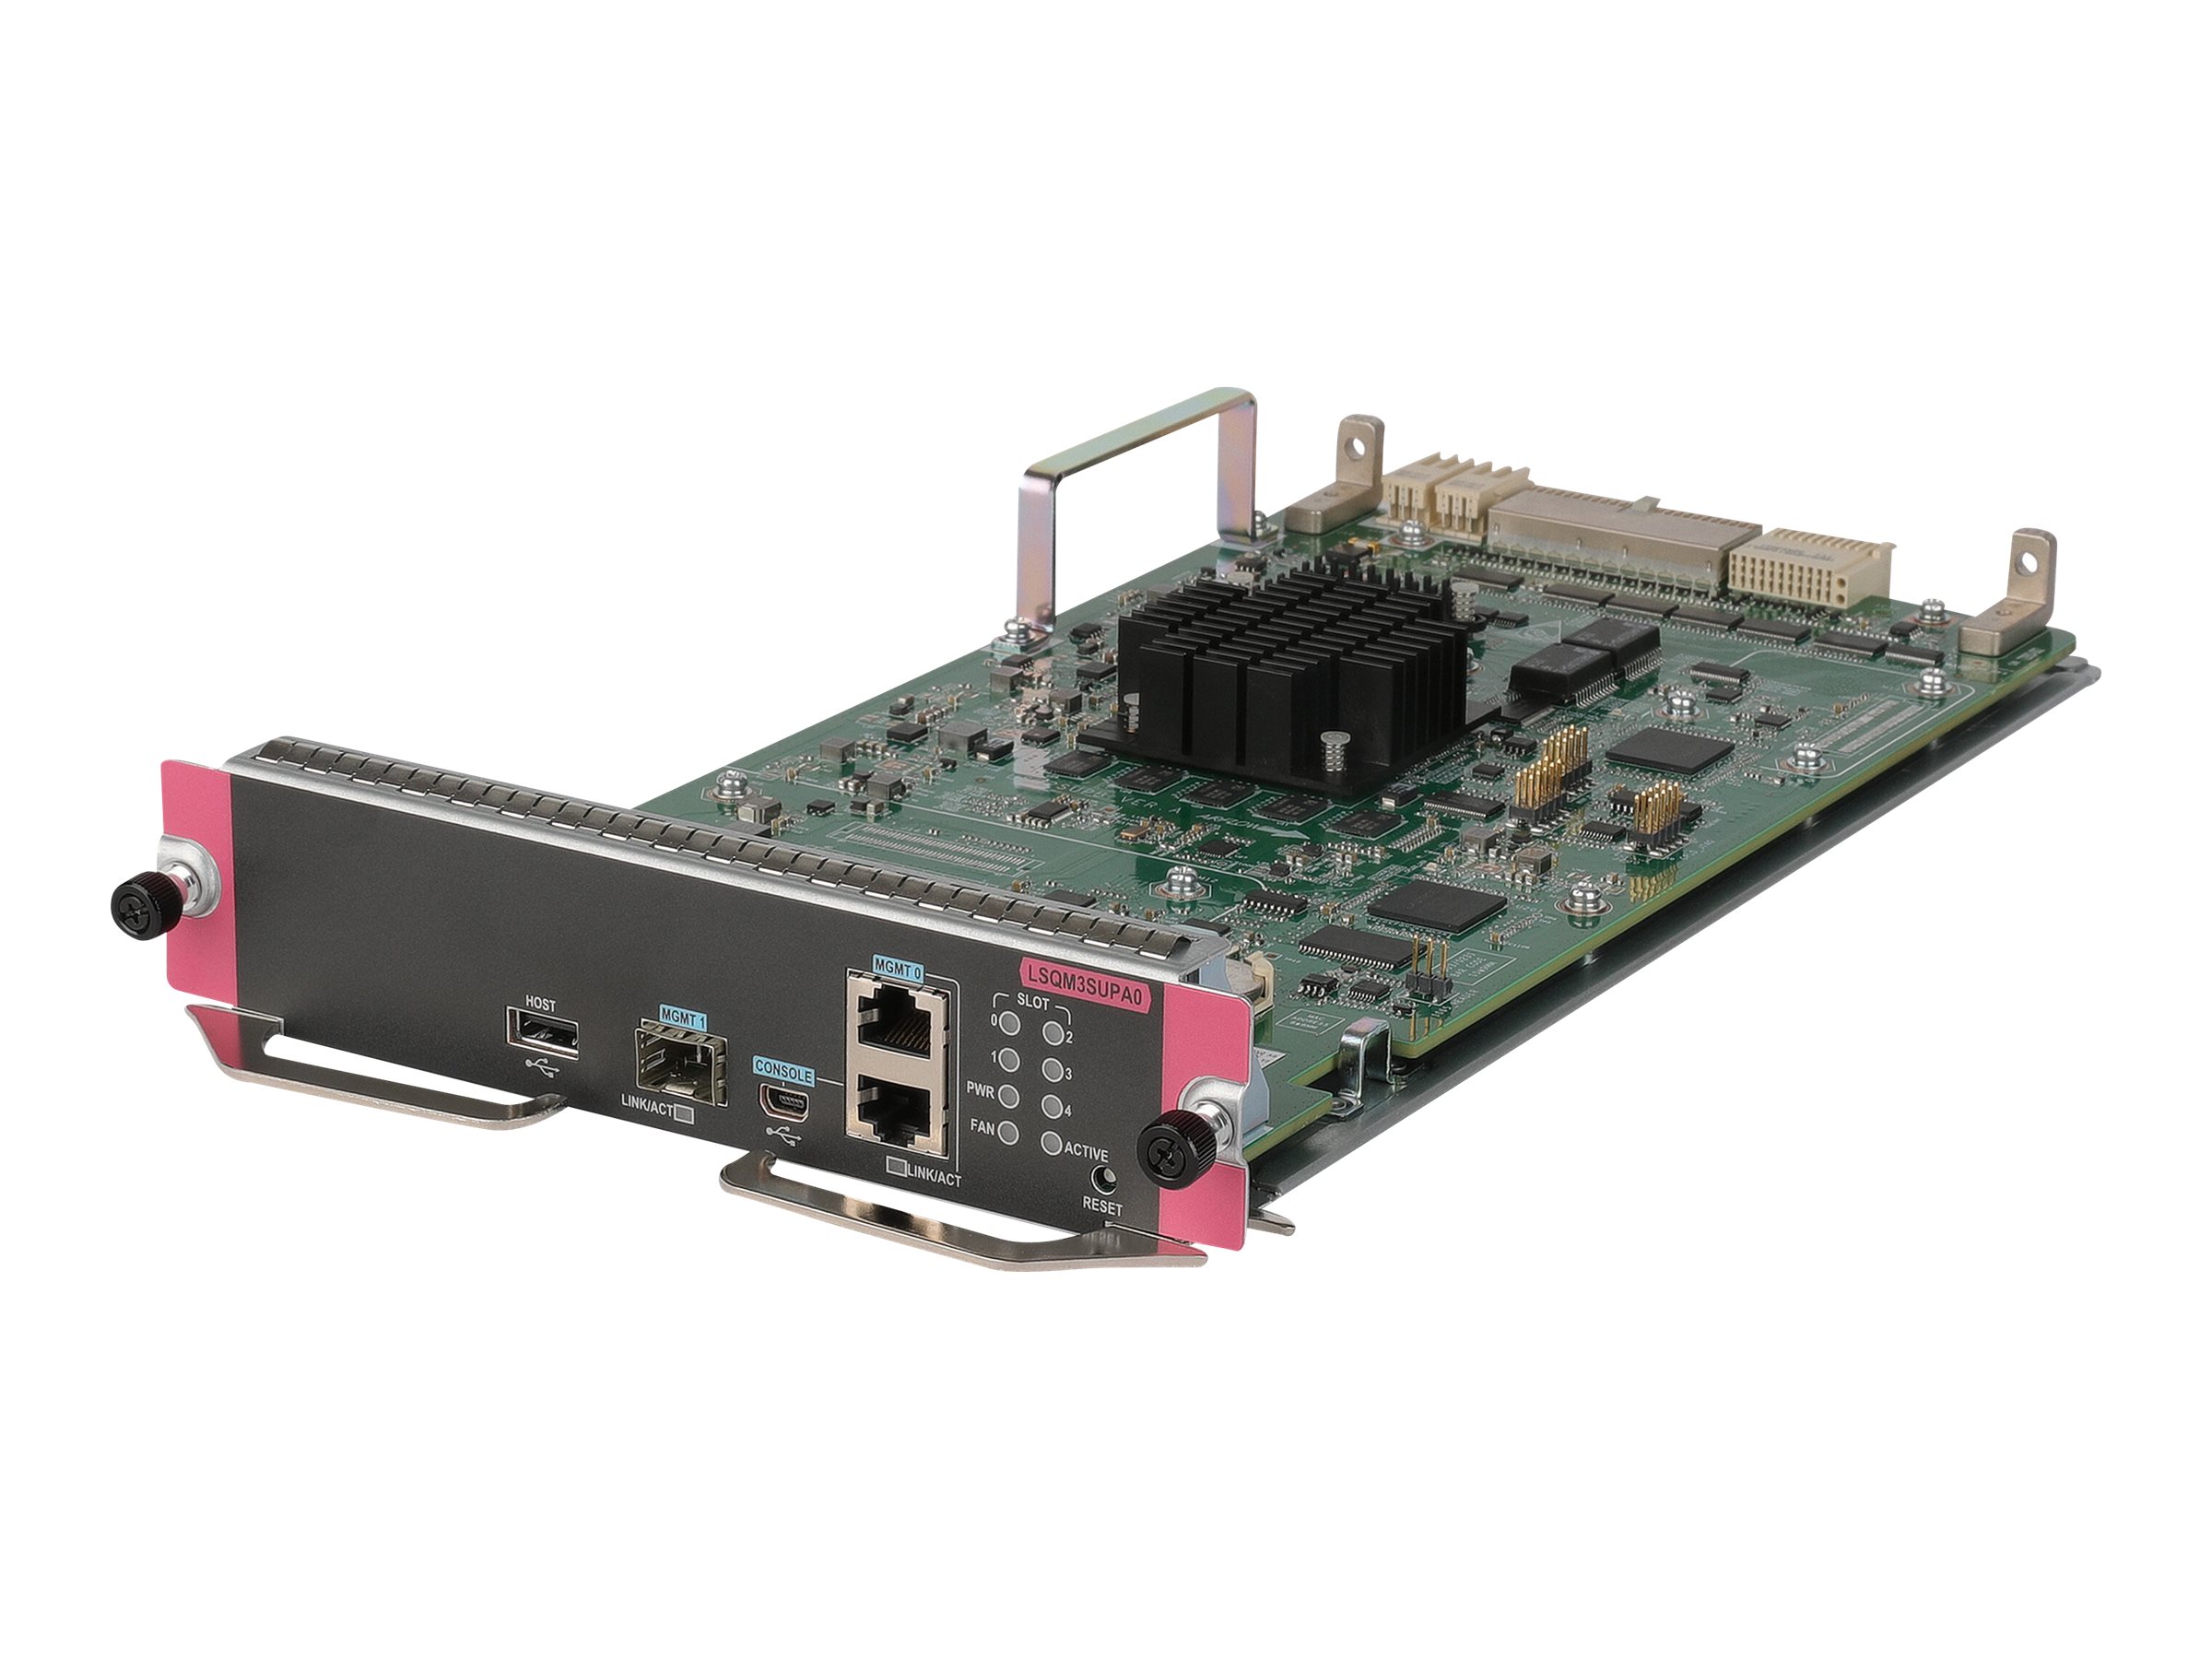 HPE FlexNetwork Type A Main Processing Unit